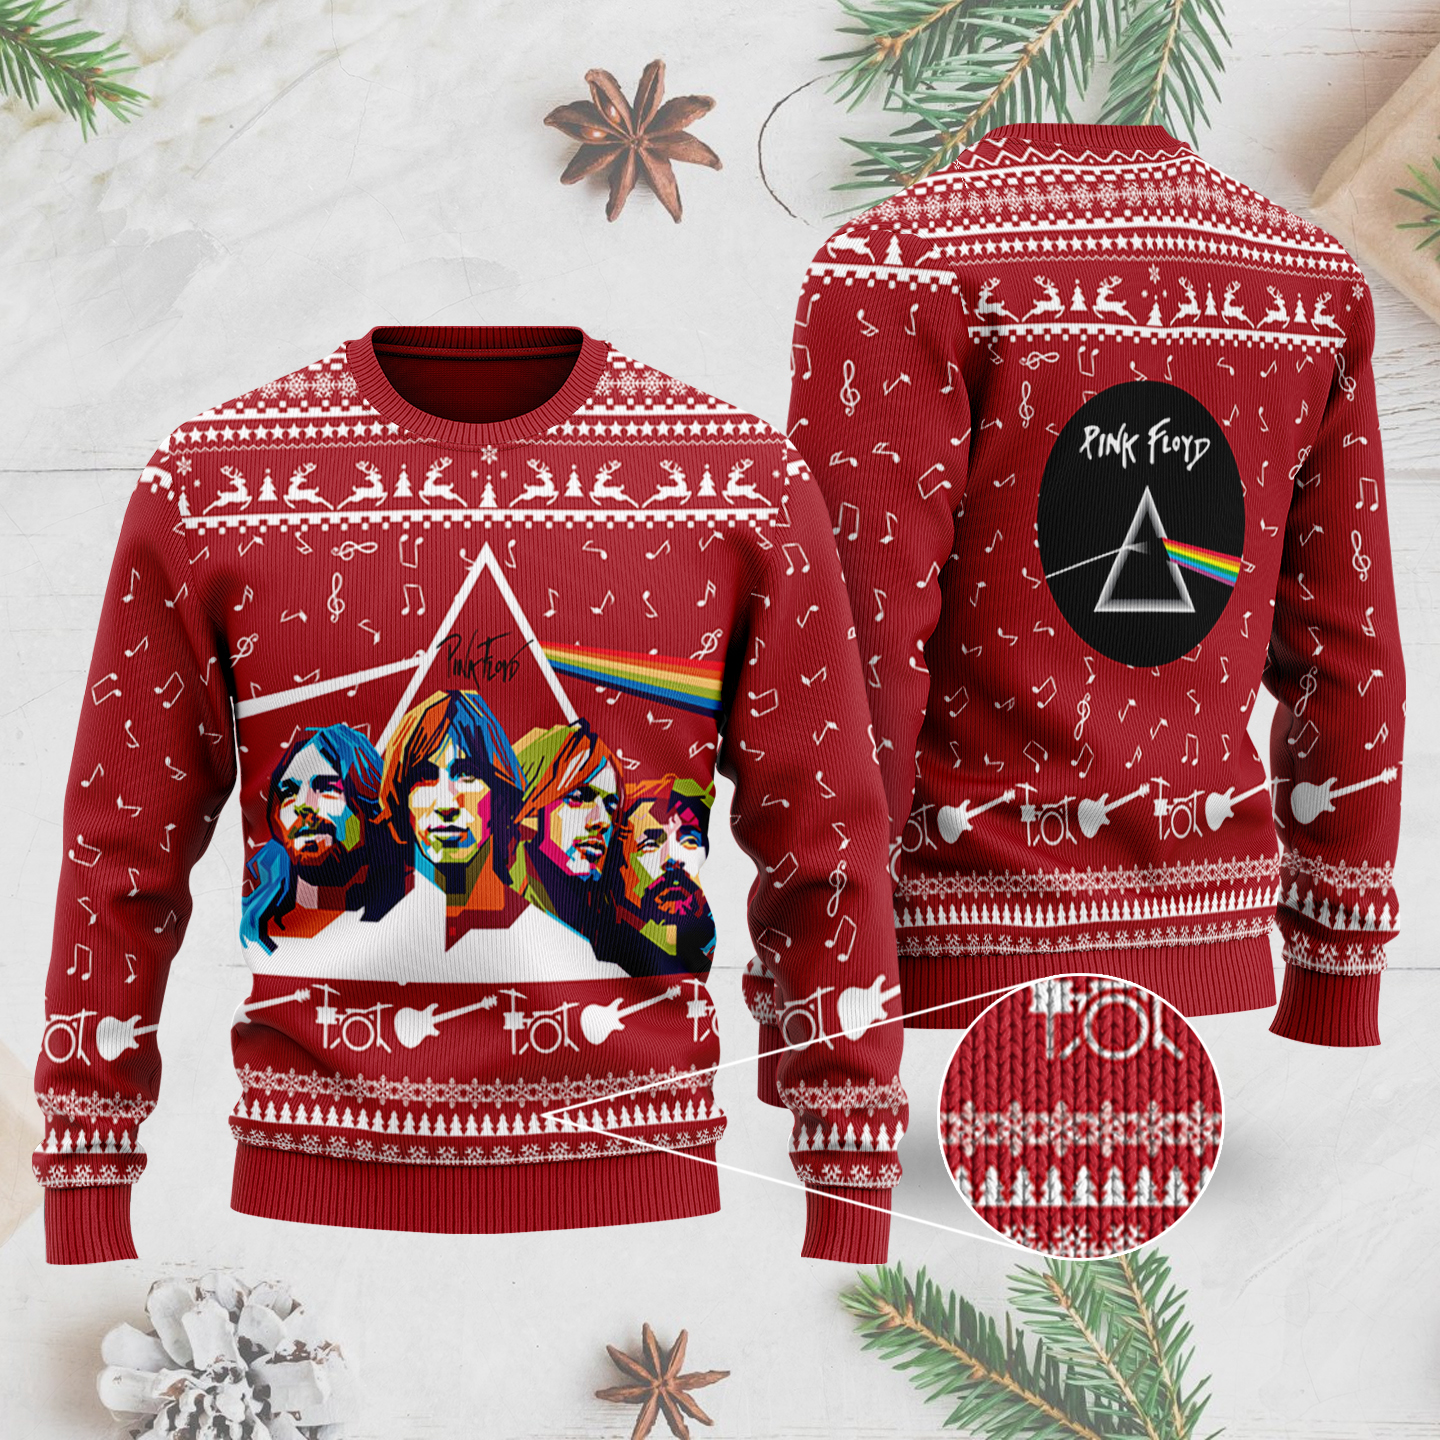 Queen Band Ugly Christmas Sweater - Trends Bedding